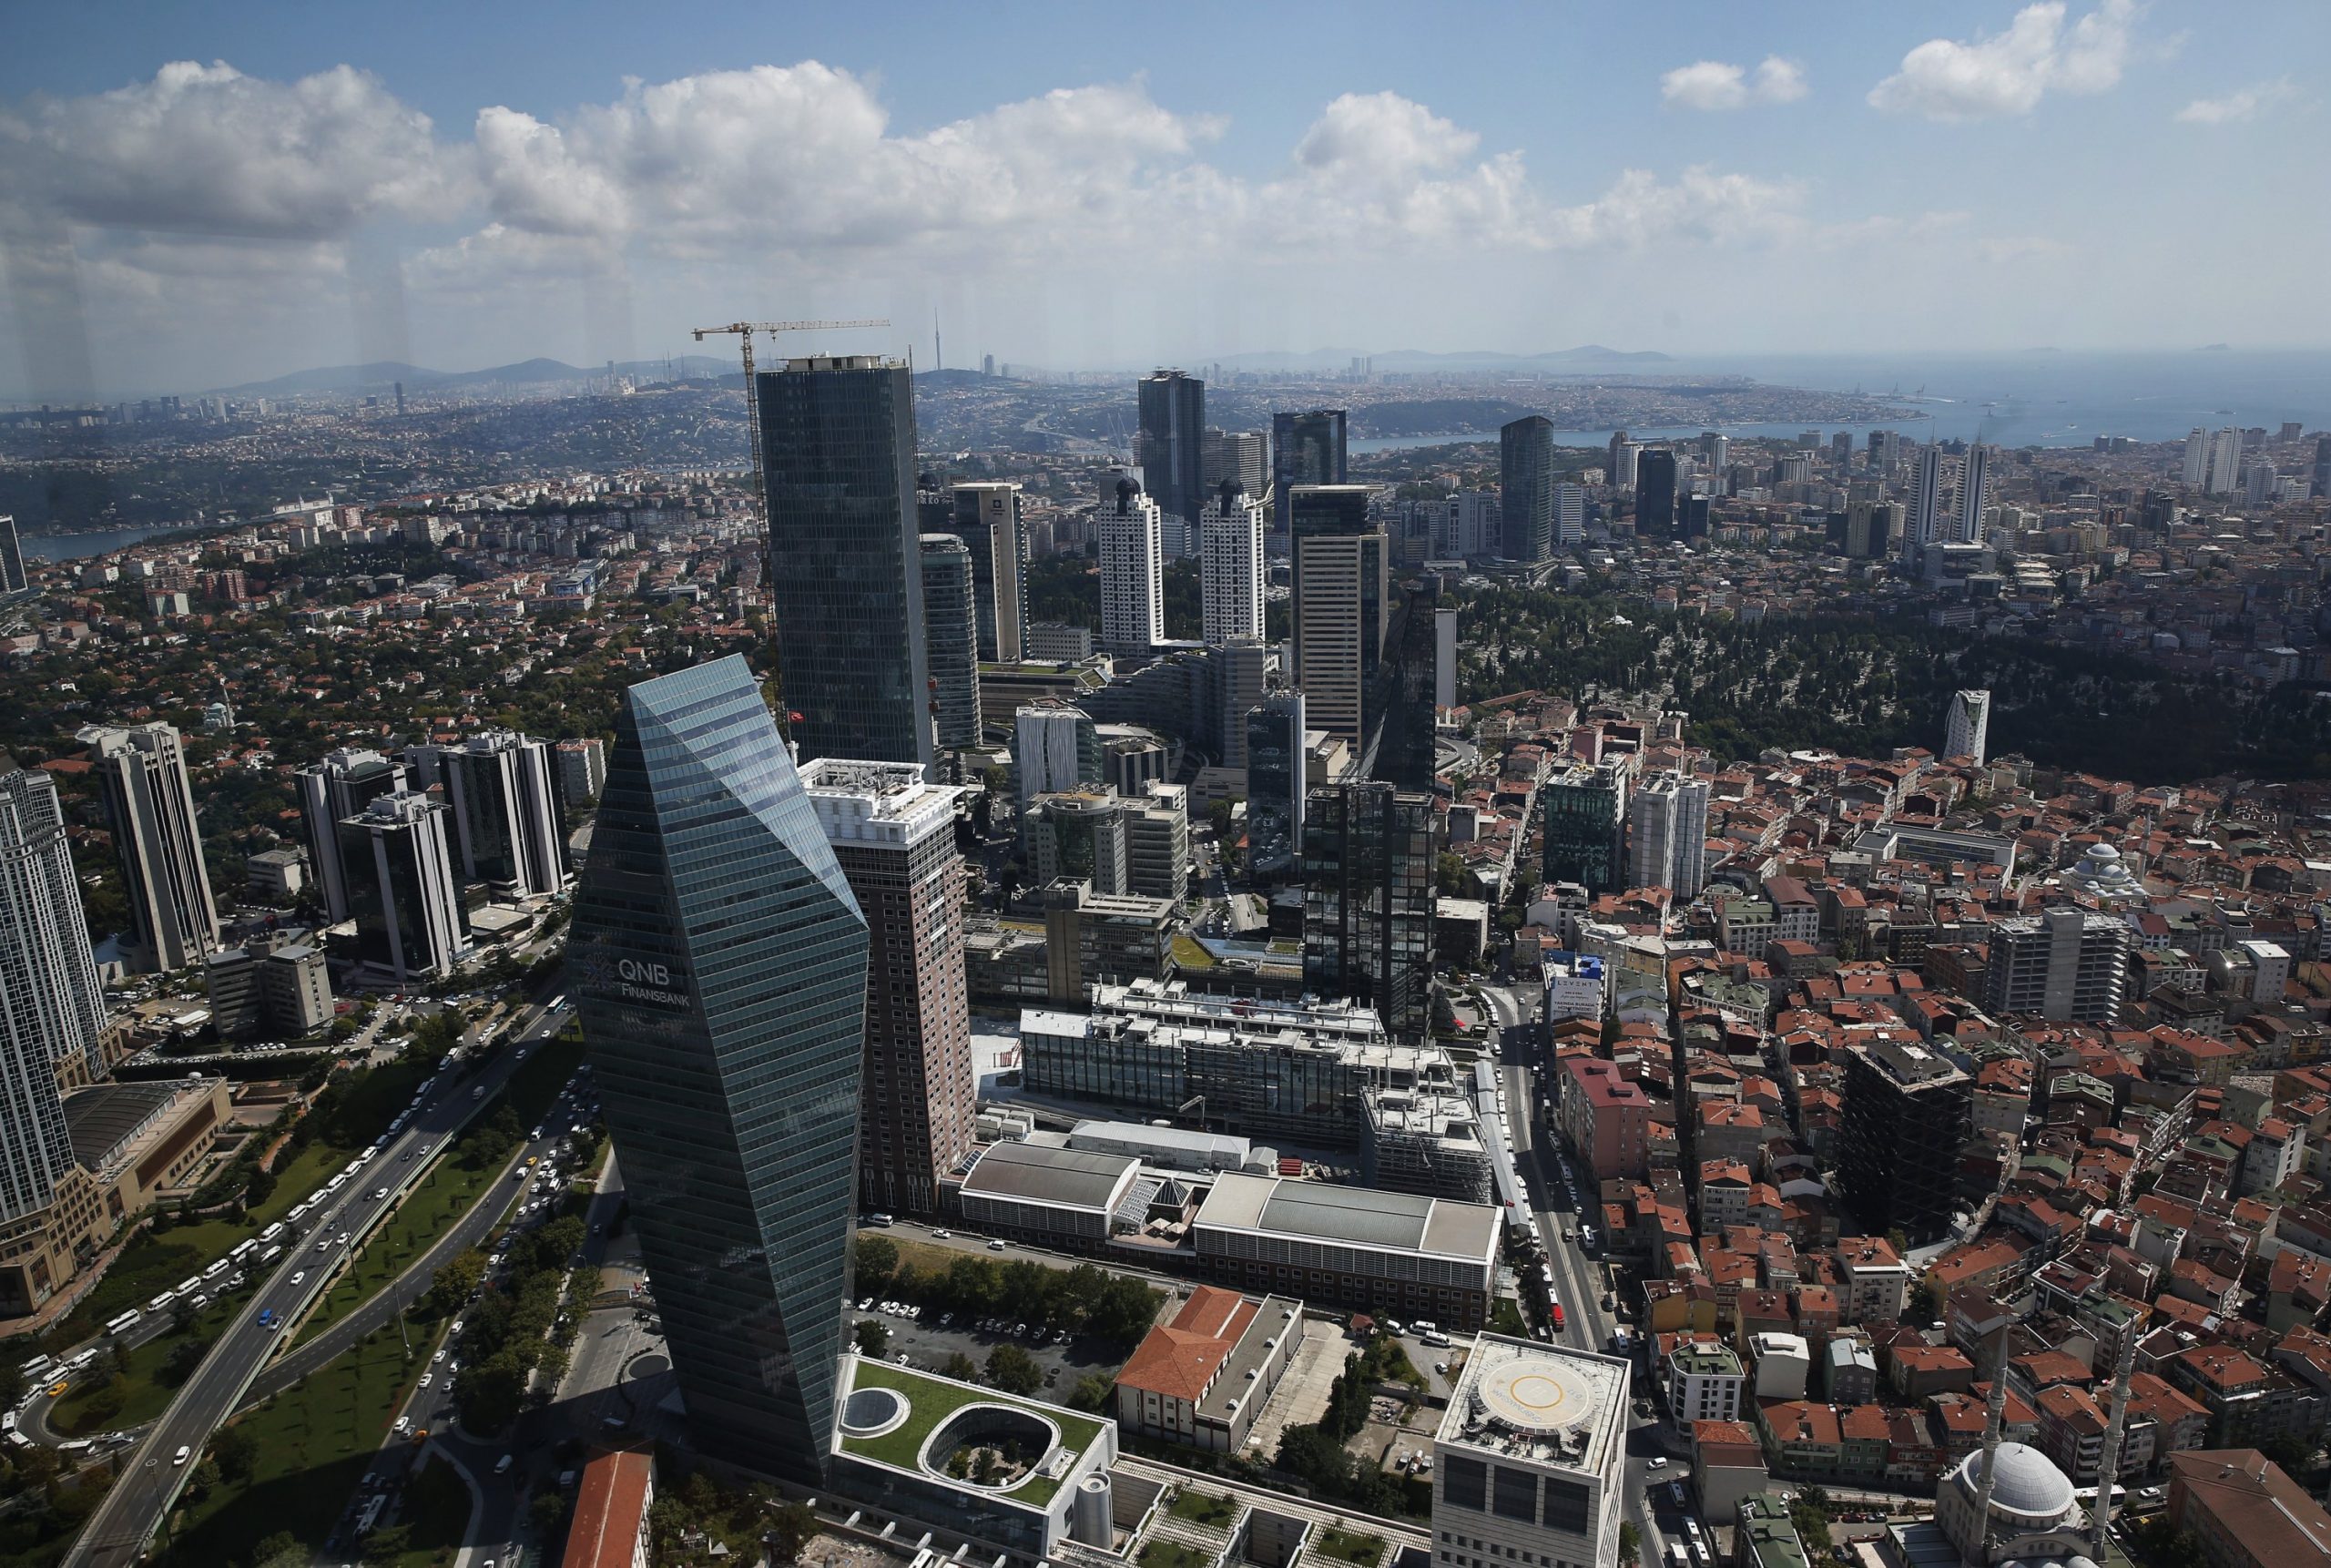  Investing in residential and commercial real estate in Turkey